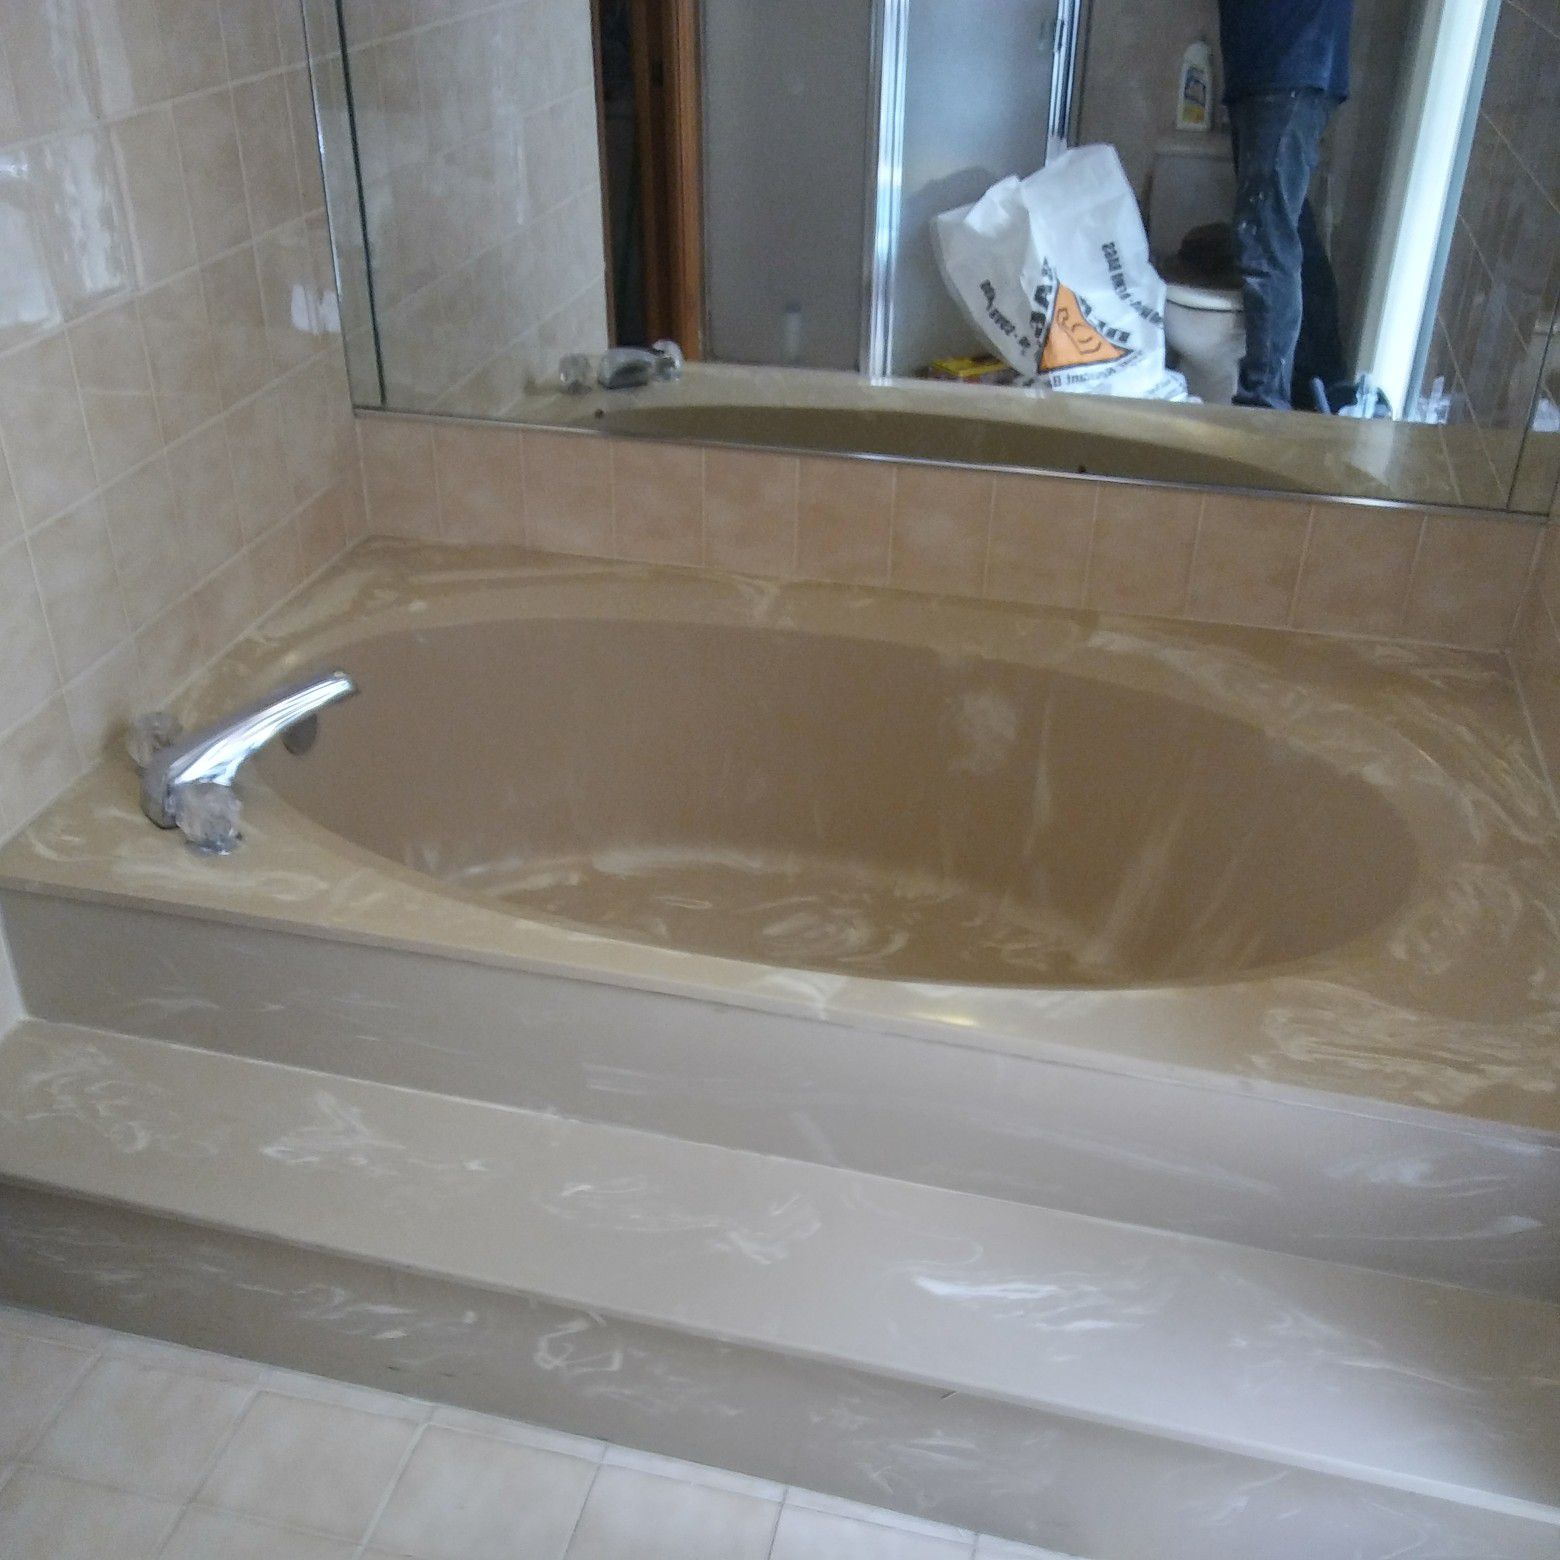 Marble bathtub today only or going to dump